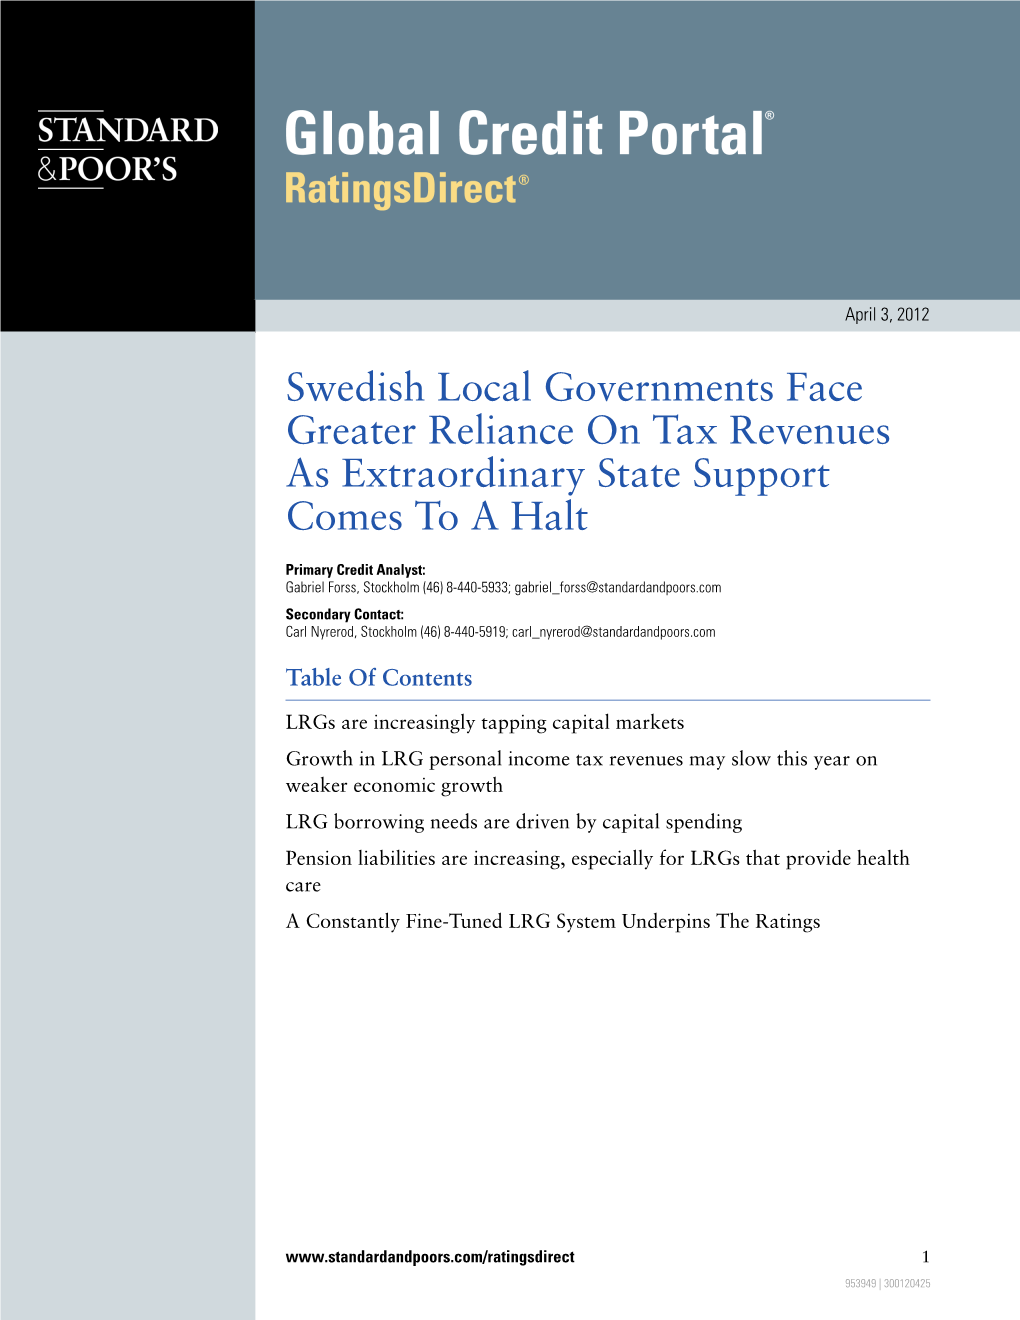 Swedish Local Governments Face Greater Reliance on Tax Revenues As Extraordinary State Support Comes to a Halt